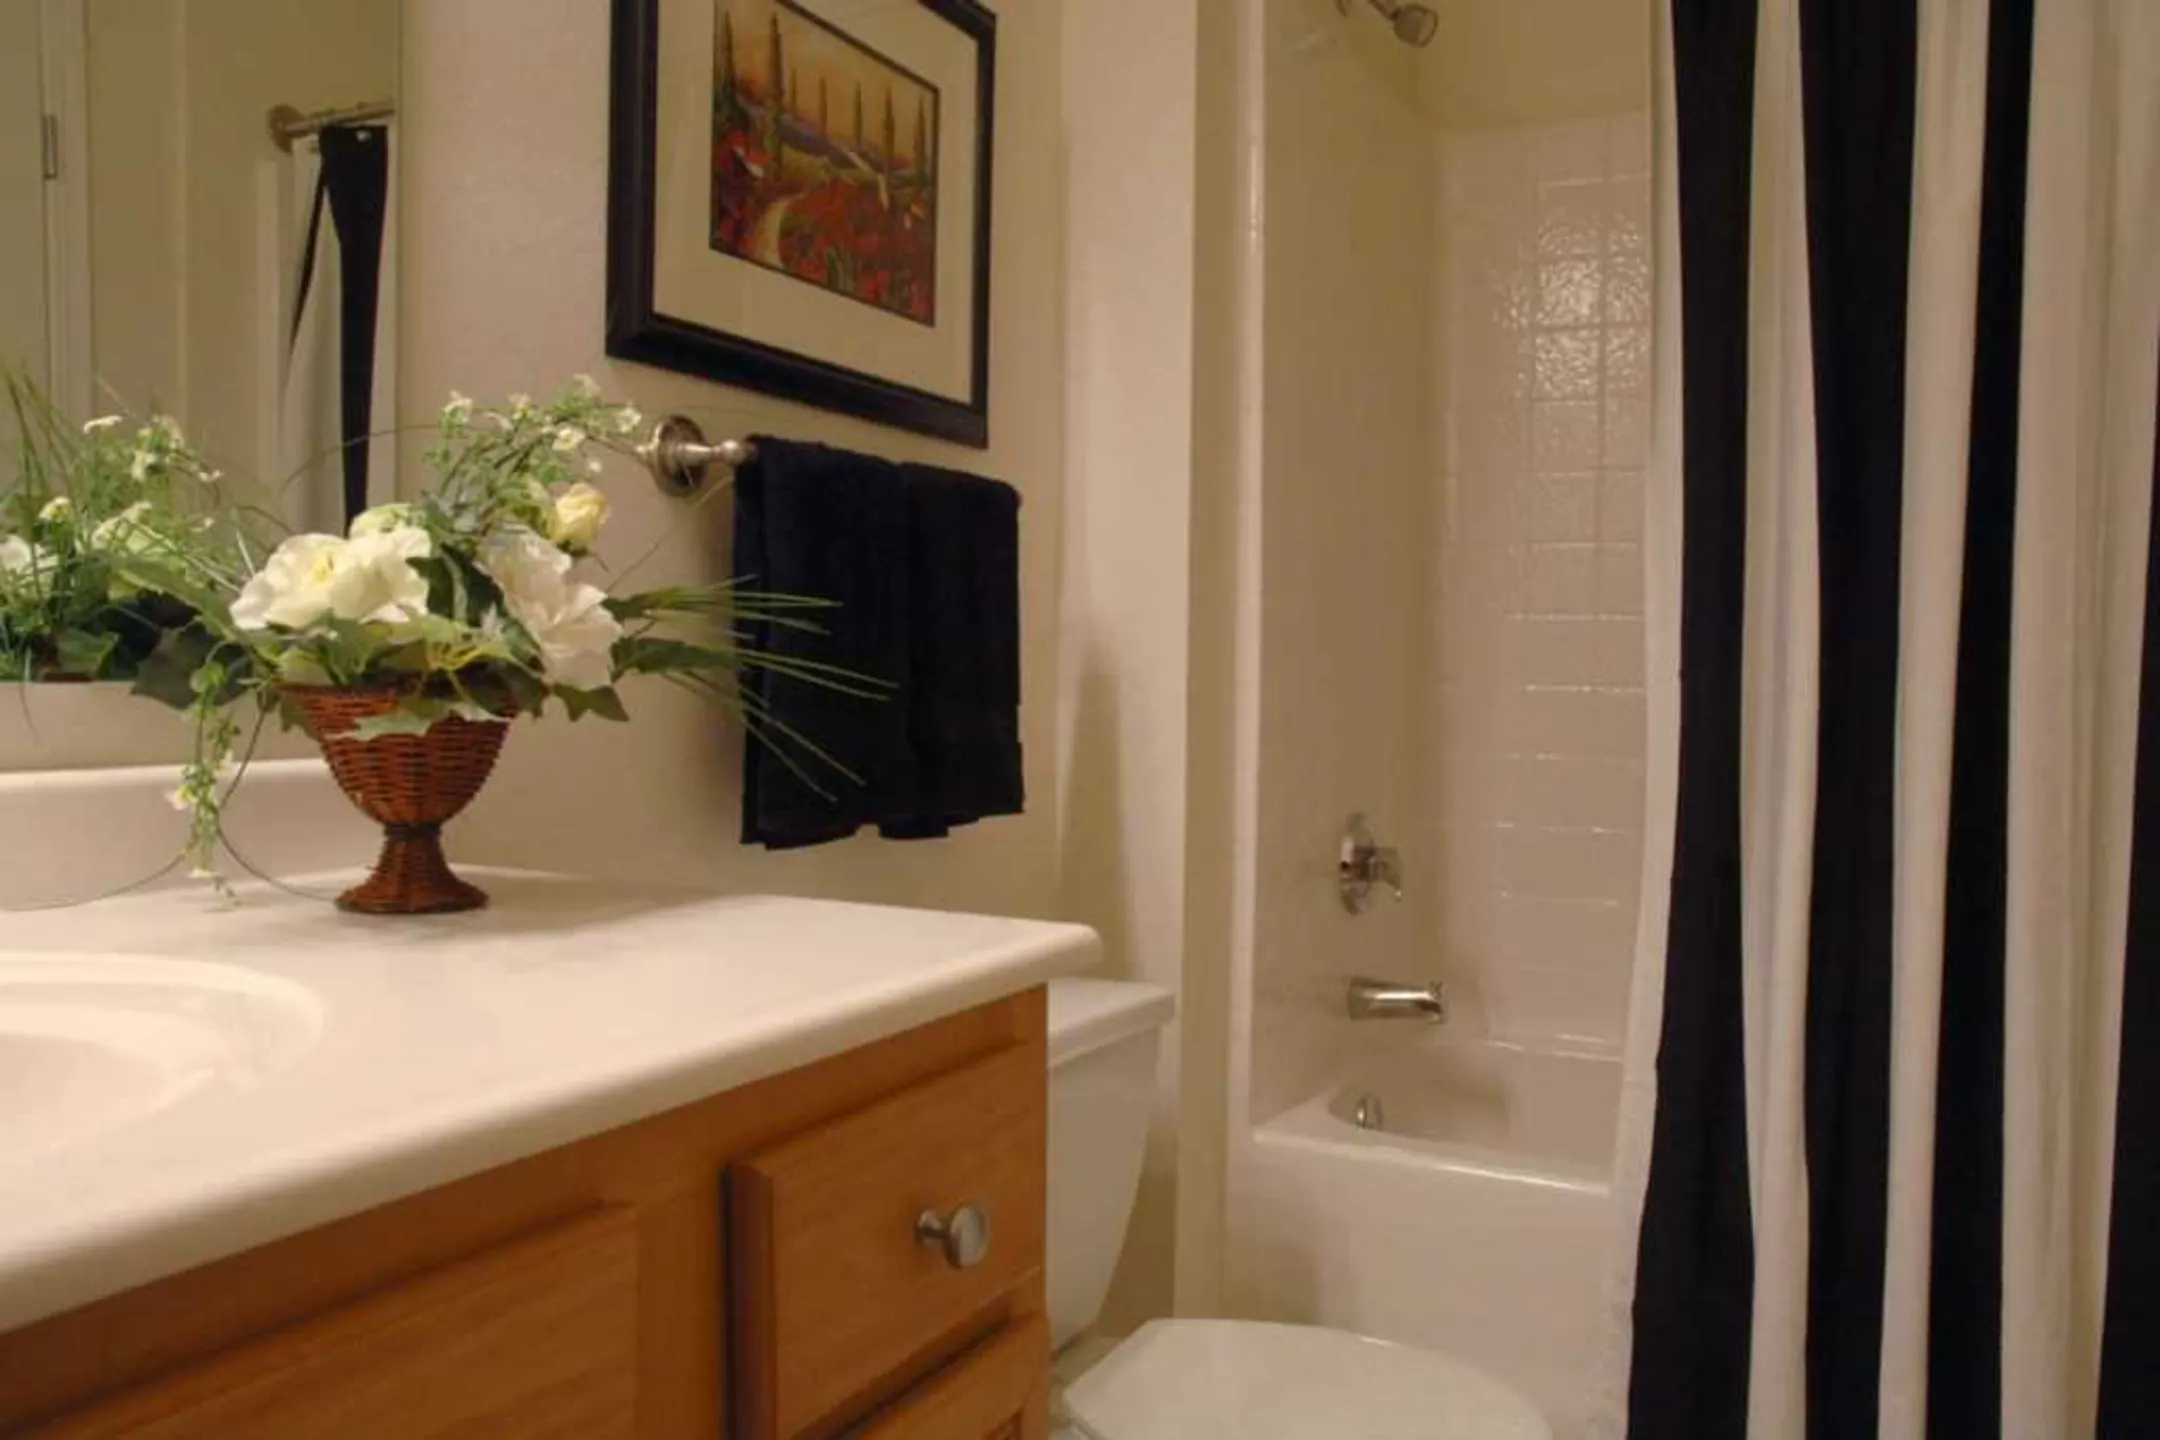 Bathroom - Blackberry Pointe Apartments - Inver Grove Heights, MN